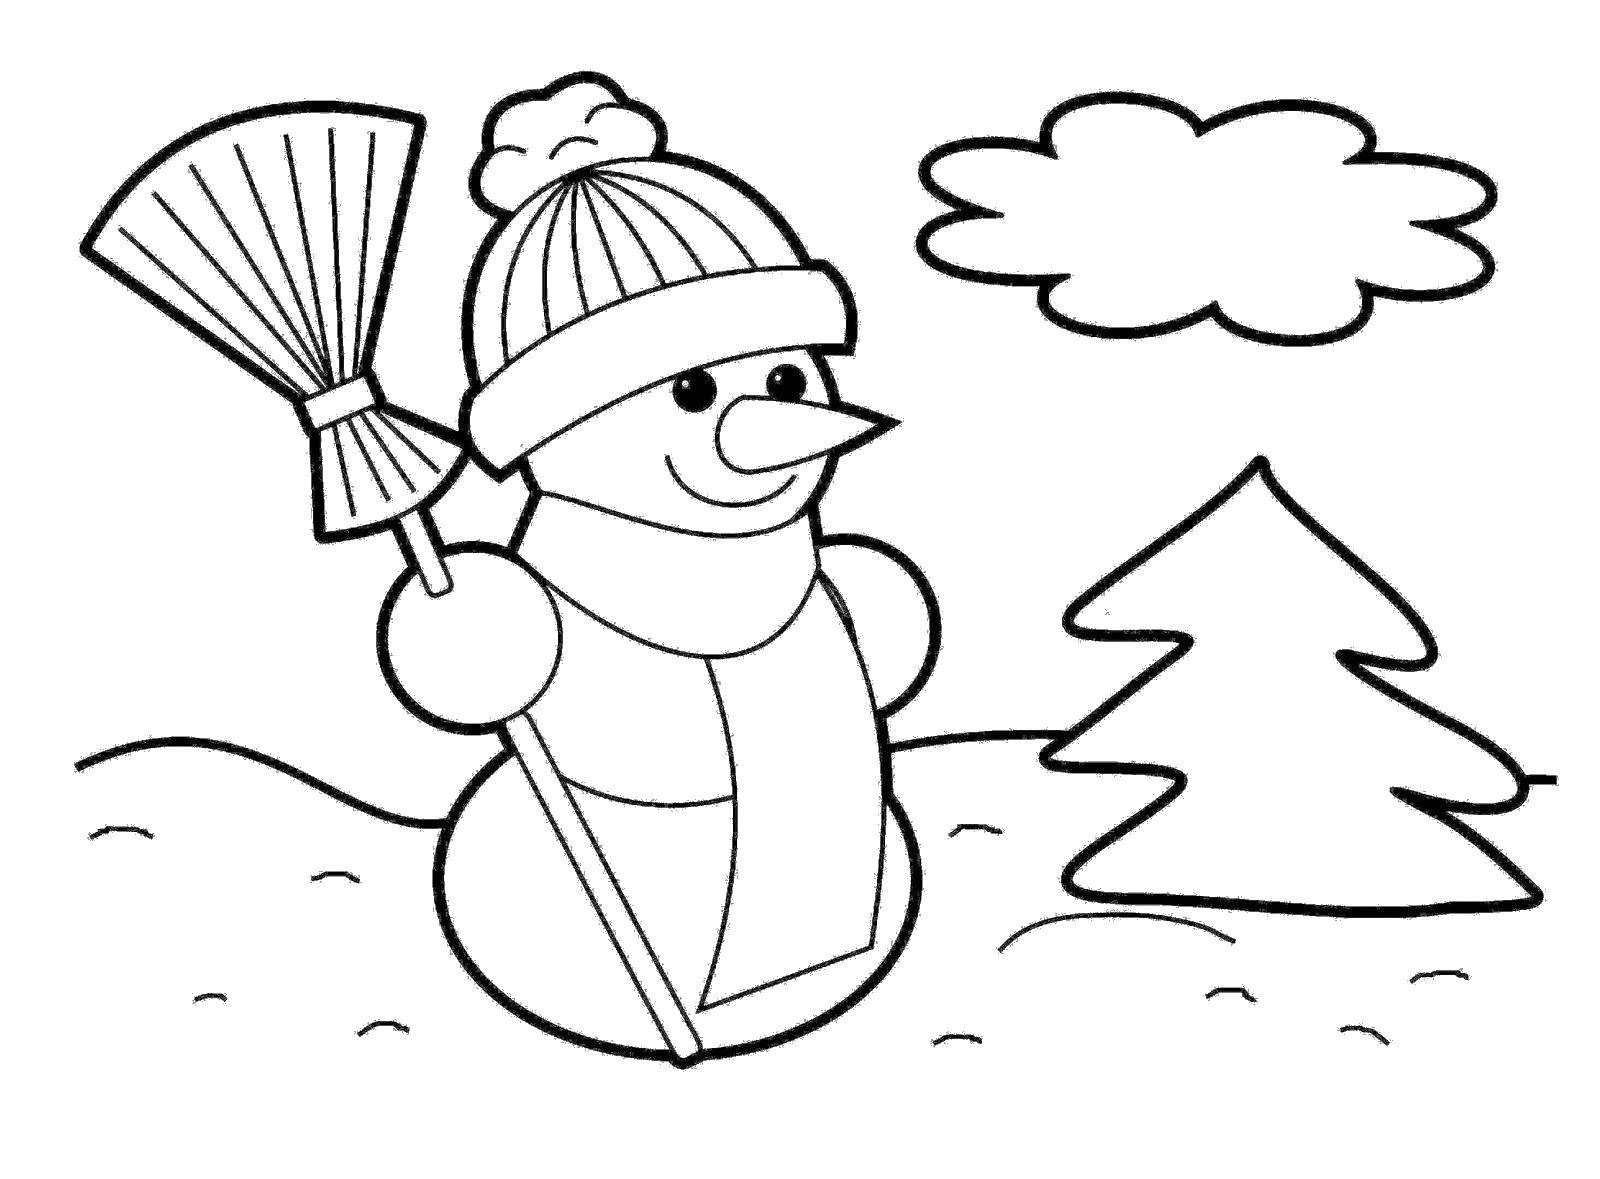 Coloring Snowman. Category snow. Tags:  snow, snowman, snowball.